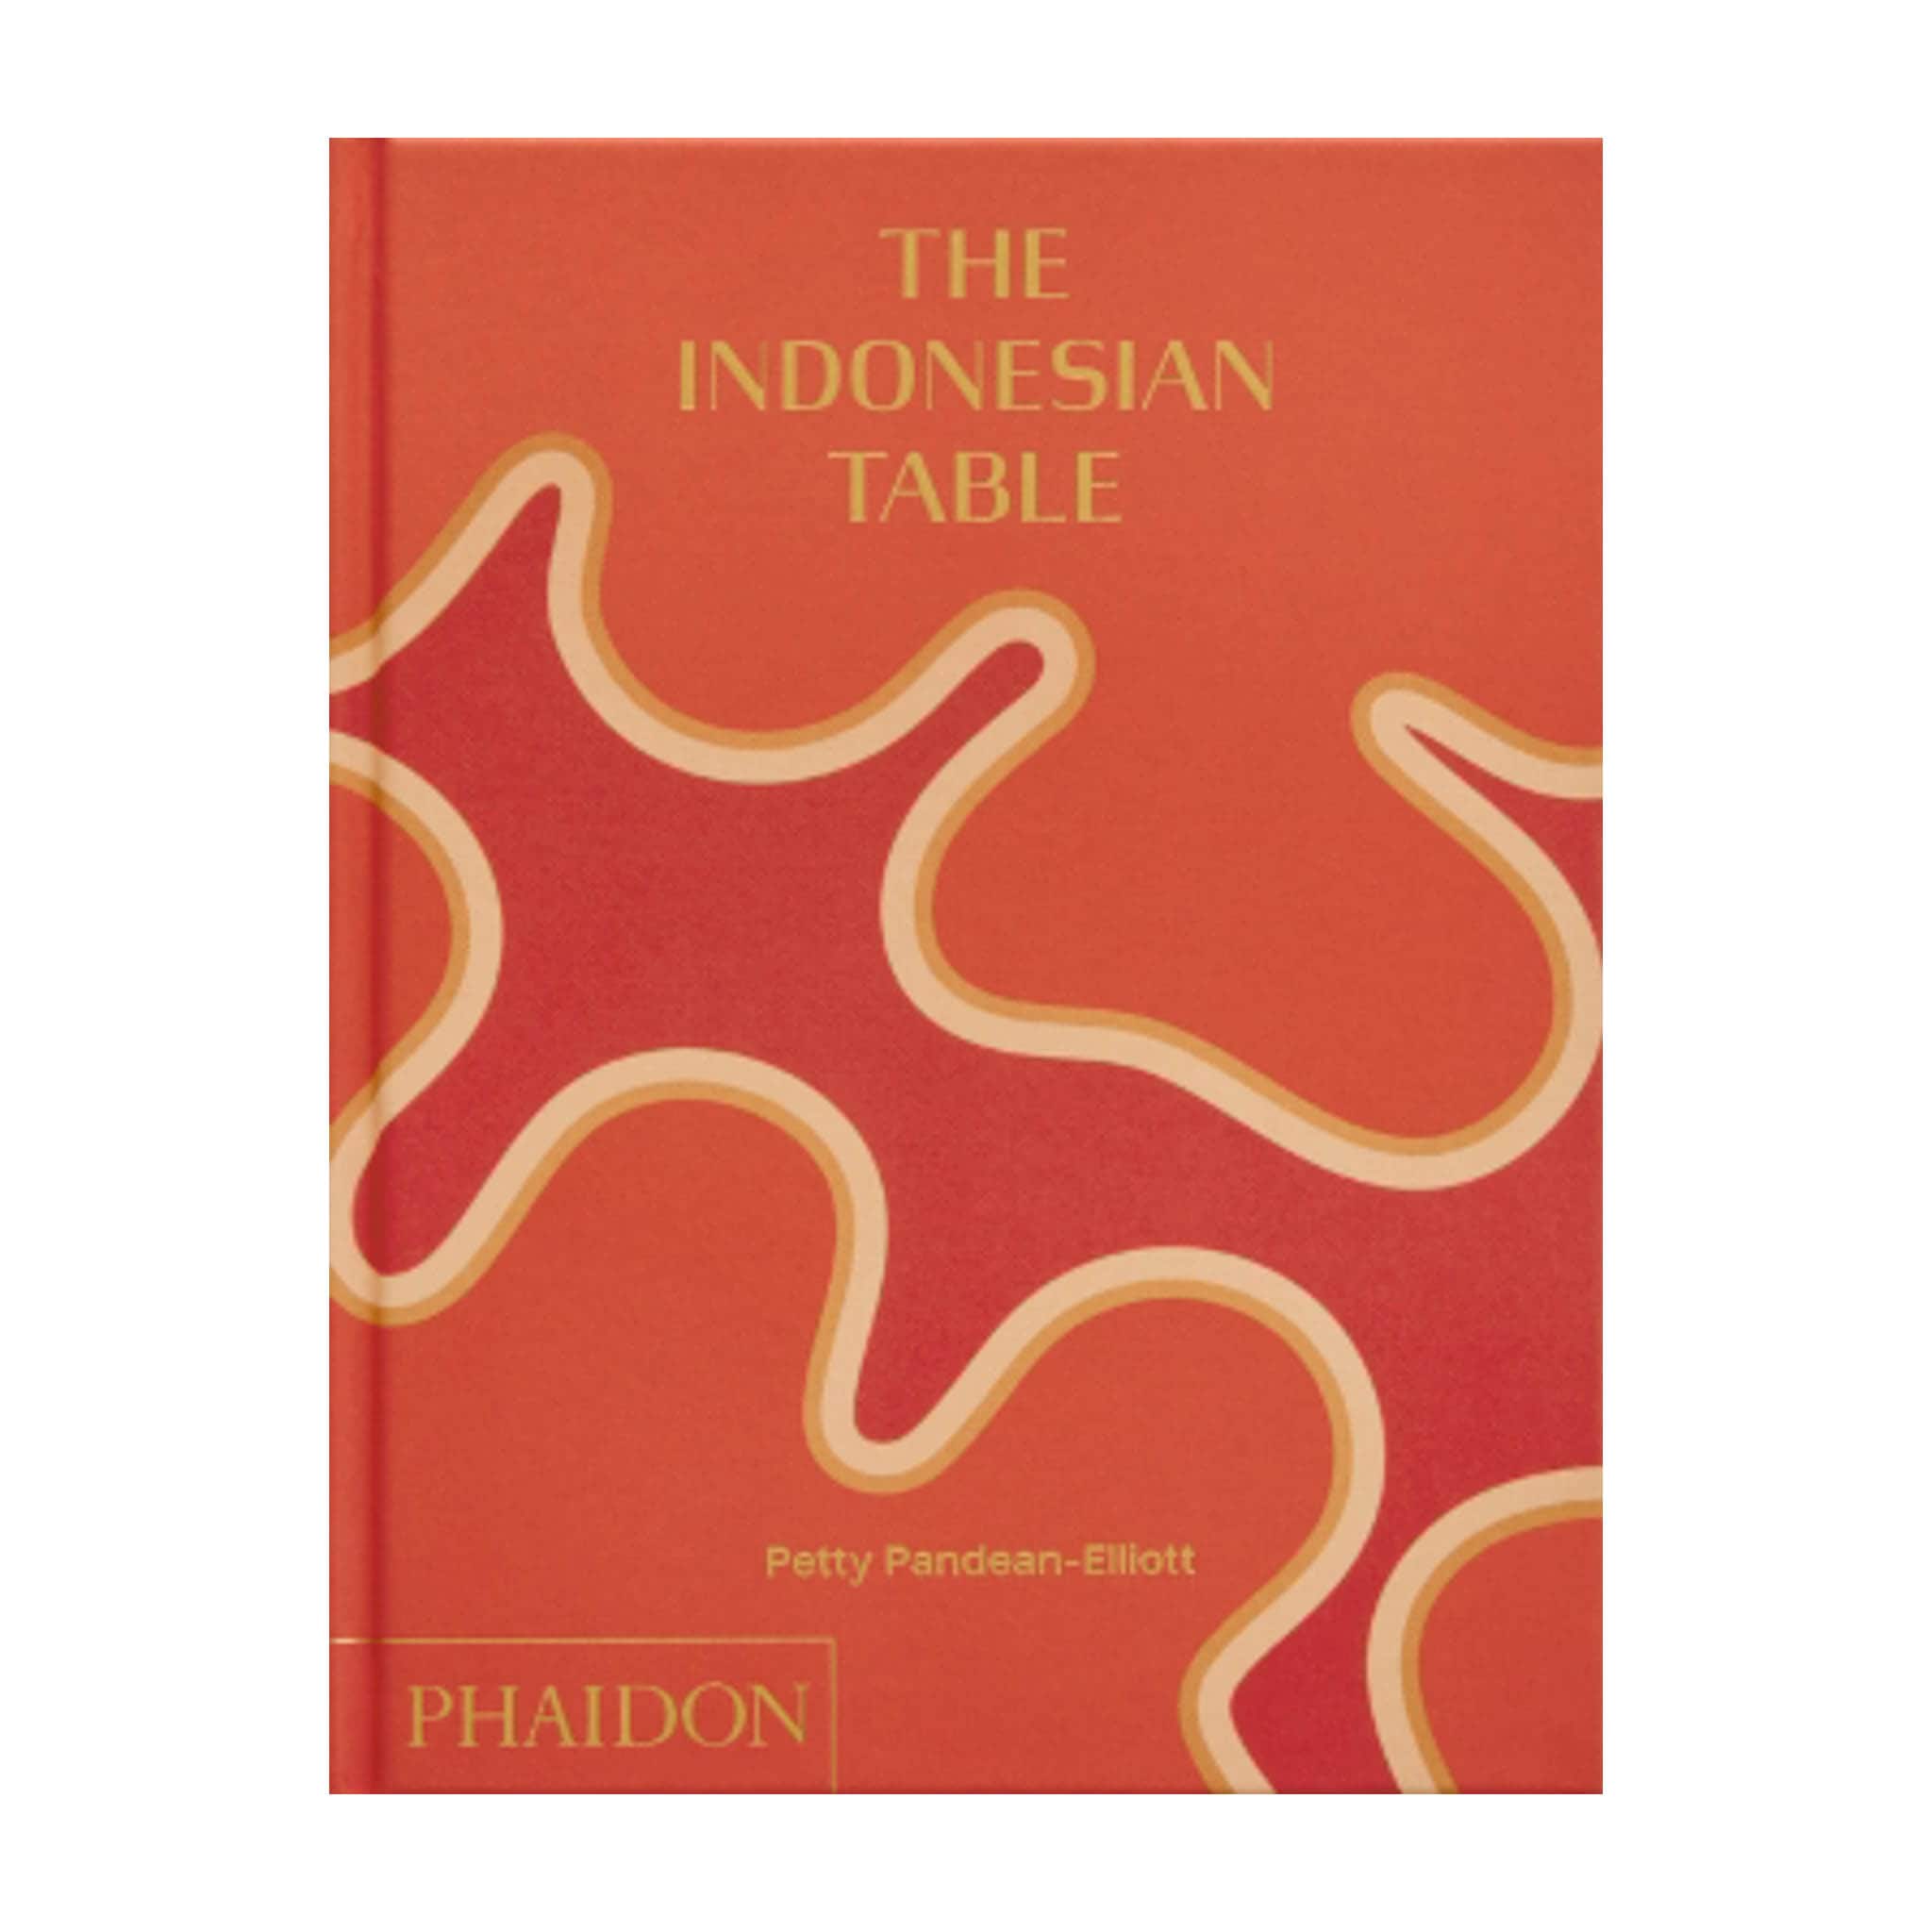 The Indonesian Table, by Petty Pandean-Elliott